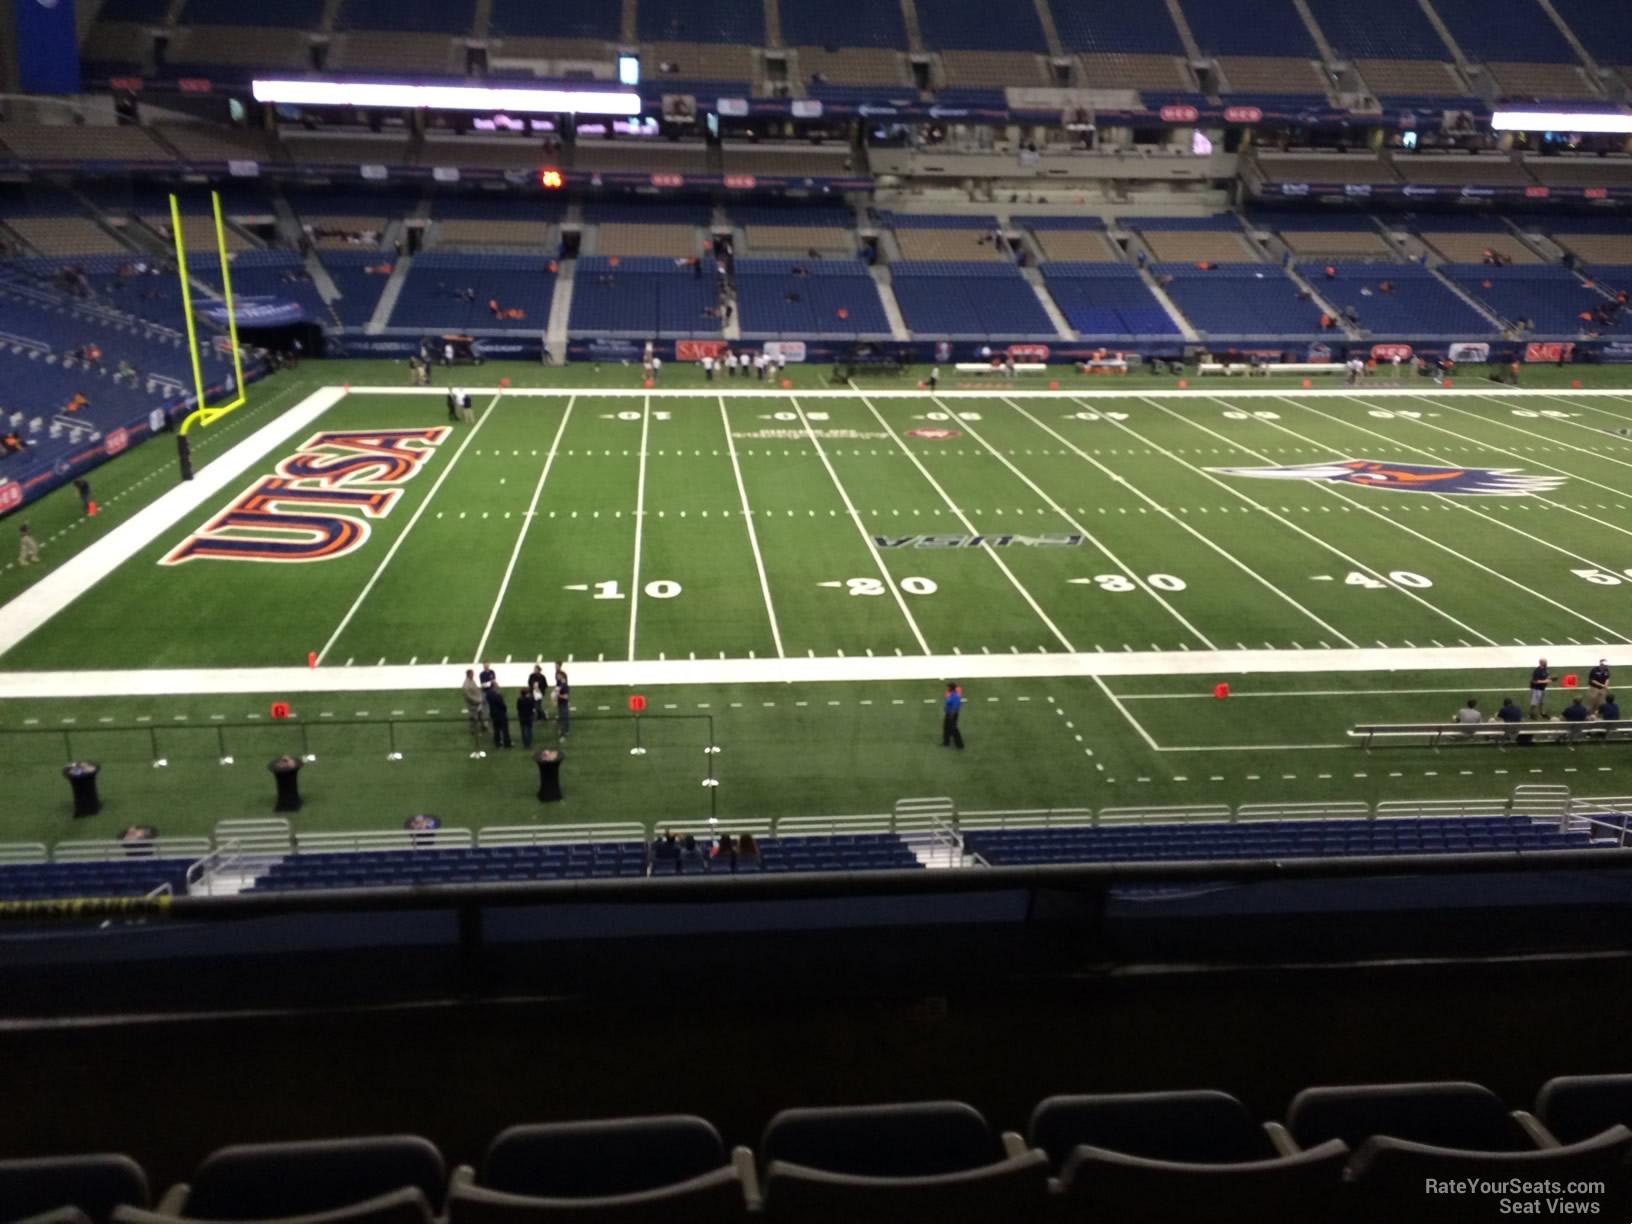 section 237, row 5 seat view  for football - alamodome